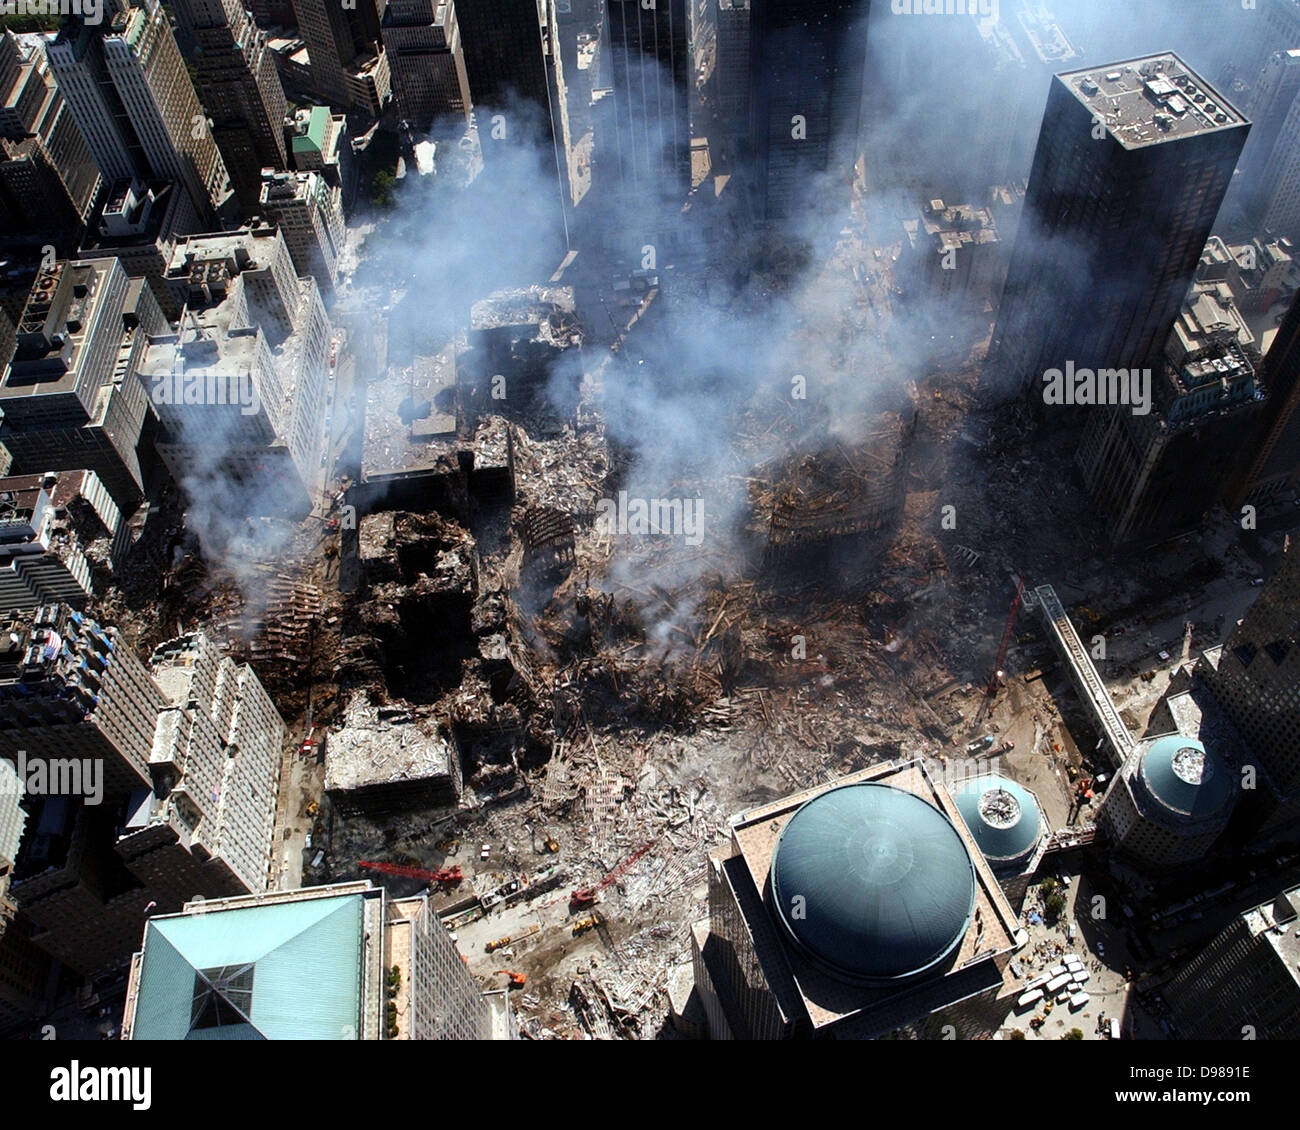 Ground Zero, New York City, N.Y. (Sept. 17, 2001) -- An aerial view shows only a small portion of the crime scene where the World Trade Center collapsed following the Sept. 11 terrorist attack. Surrounding buildings were heavily damaged by the debris and massive force of the falling twin towers. Clean-up efforts are expected to continue for months. U.S. Navy photo Stock Photo